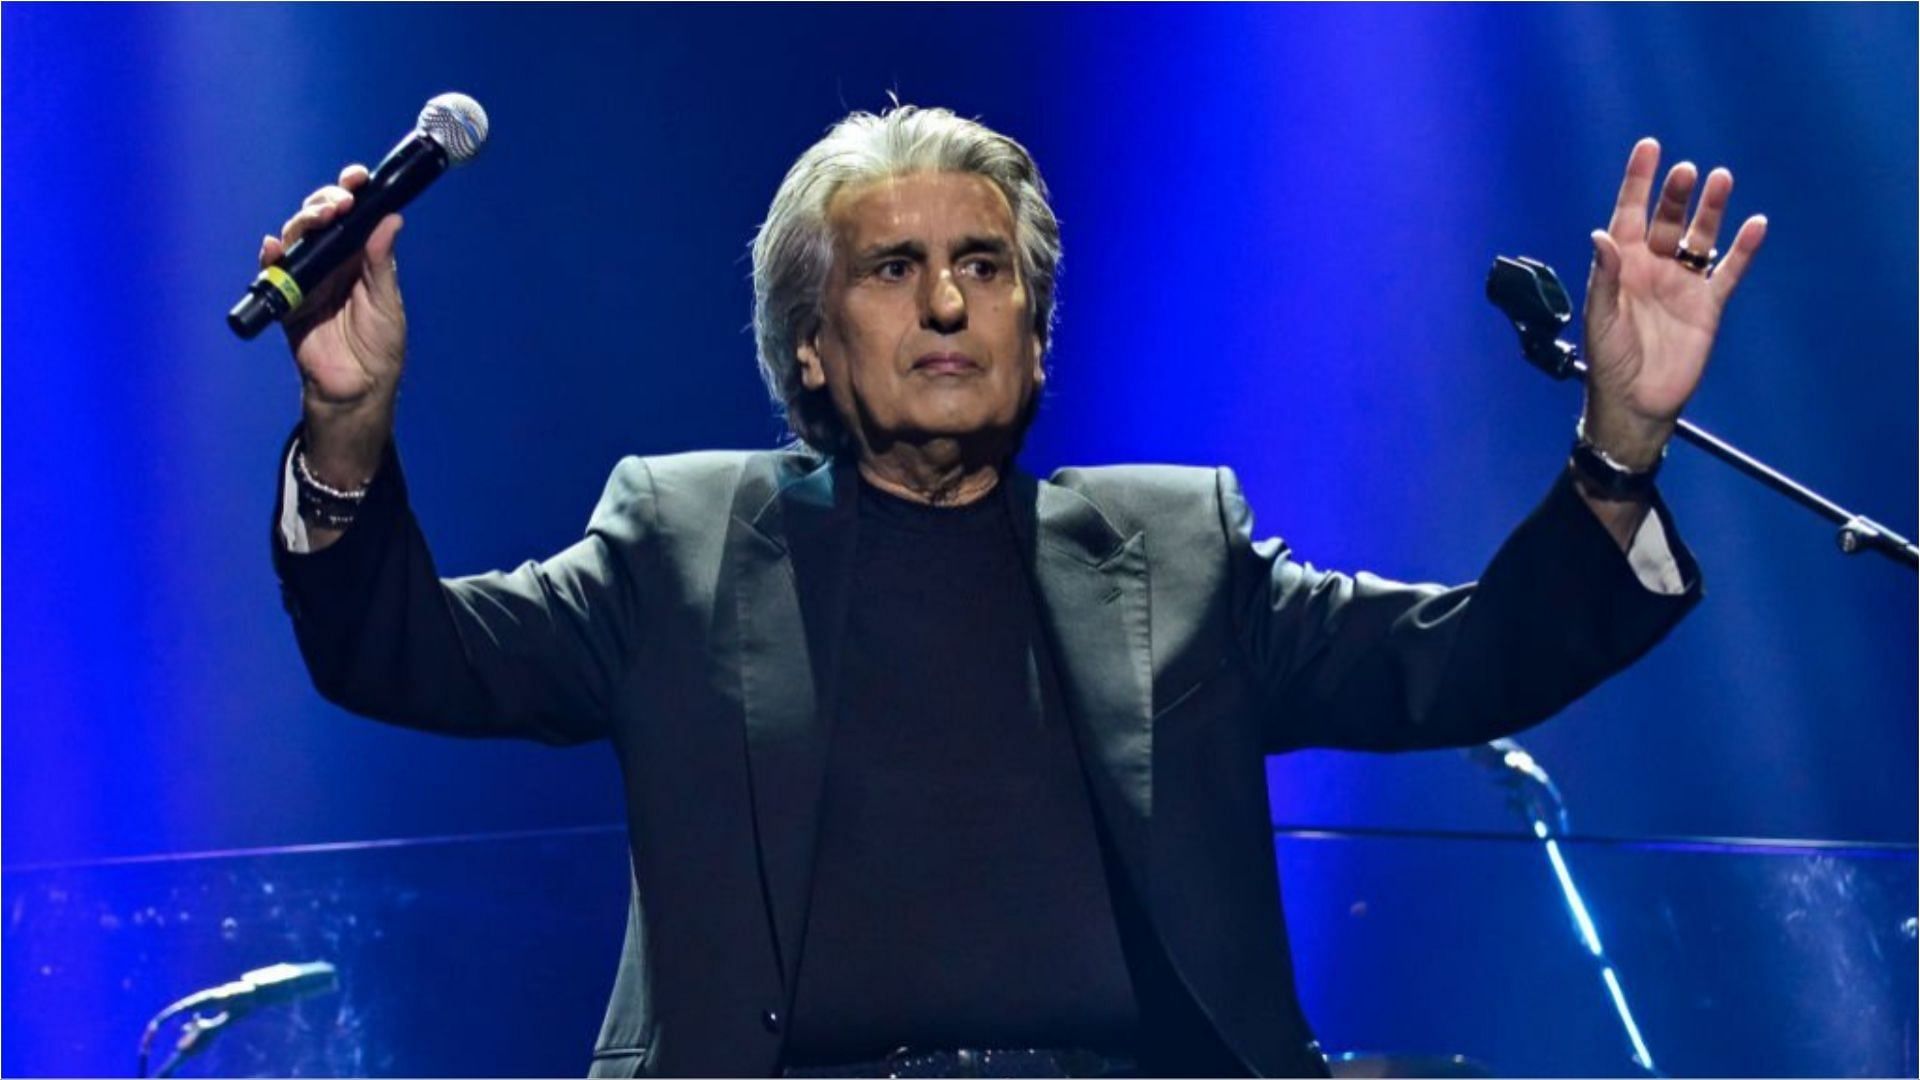 Toto Cutugno recently died at the age of 80 (Image via Alexndr Gusew/Getty Images)